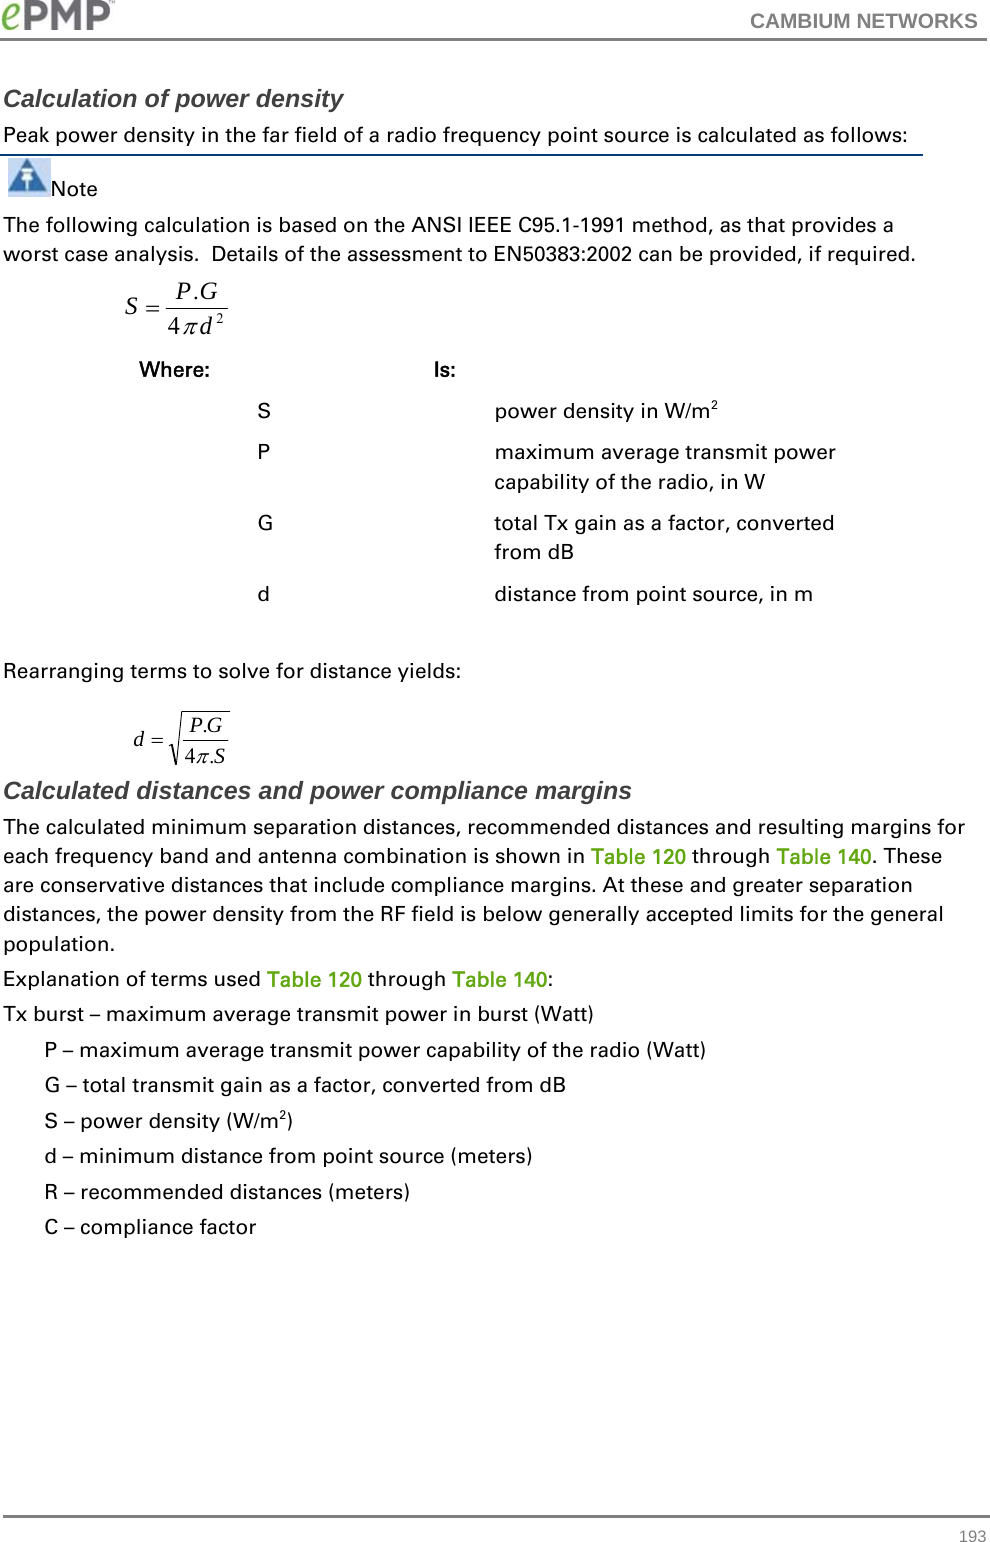 CAMBIUM NETWORKS   193Calculation of power density Peak power density in the far field of a radio frequency point source is calculated as follows:  Note The following calculation is based on the ANSI IEEE C95.1-1991 method, as that provides a worst case analysis.  Details of the assessment to EN50383:2002 can be provided, if required.    Where:   Is:     S    power density in W/m2   P    maximum average transmit power capability of the radio, in W   G    total Tx gain as a factor, converted from dB   d    distance from point source, in m  Rearranging terms to solve for distance yields:   Calculated distances and power compliance margins The calculated minimum separation distances, recommended distances and resulting margins for each frequency band and antenna combination is shown in Table 120 through Table 140. These are conservative distances that include compliance margins. At these and greater separation distances, the power density from the RF field is below generally accepted limits for the general population. Explanation of terms used Table 120 through Table 140: Tx burst – maximum average transmit power in burst (Watt) P – maximum average transmit power capability of the radio (Watt) G – total transmit gain as a factor, converted from dB S – power density (W/m2) d – minimum distance from point source (meters) R – recommended distances (meters) C – compliance factor 24.dGPSSGPd.4.